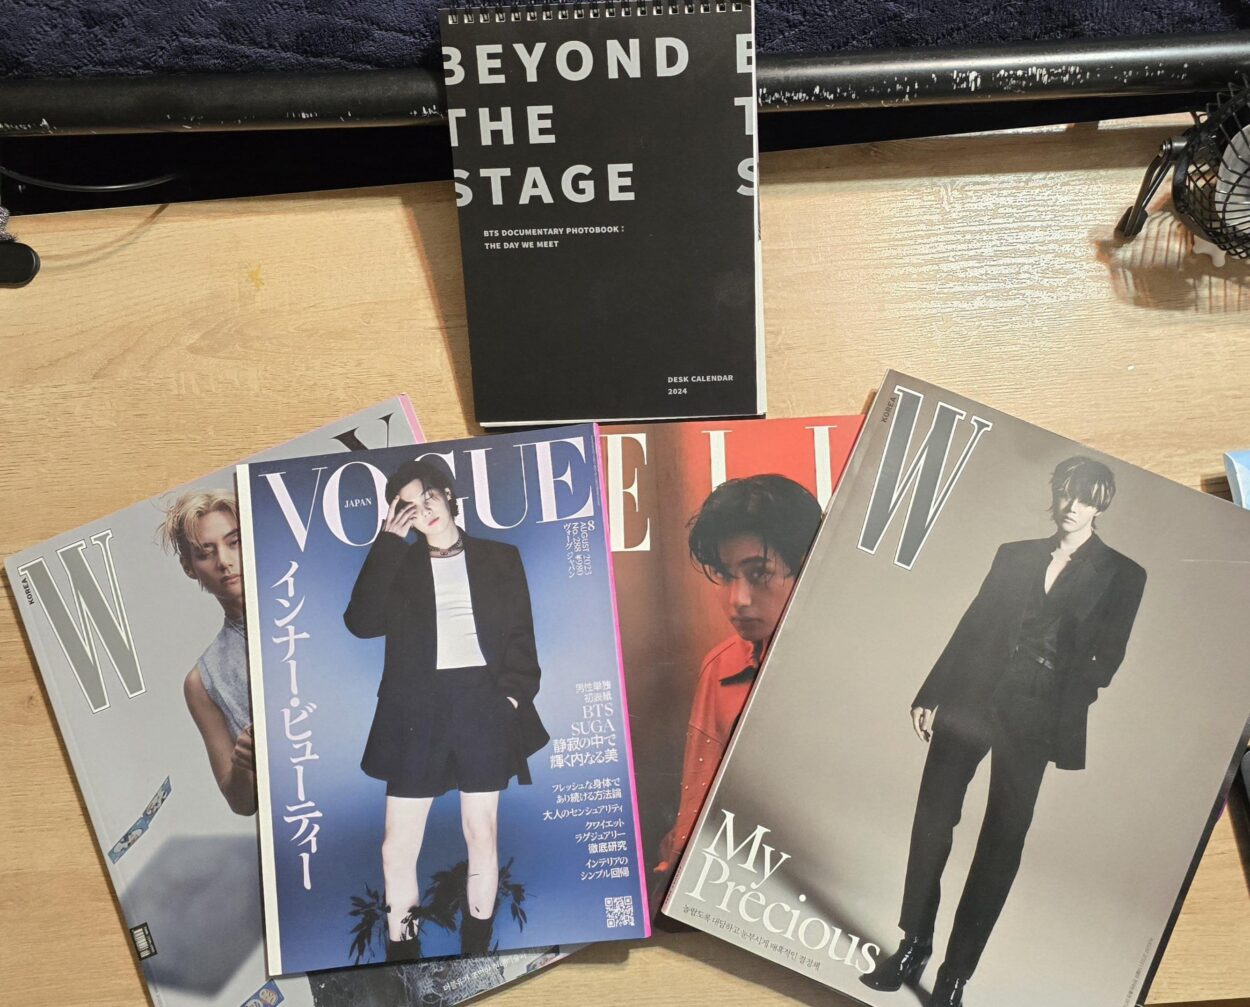 GIVEAWAY [WW] - Member Magazines, Beyond The Stage Calendar